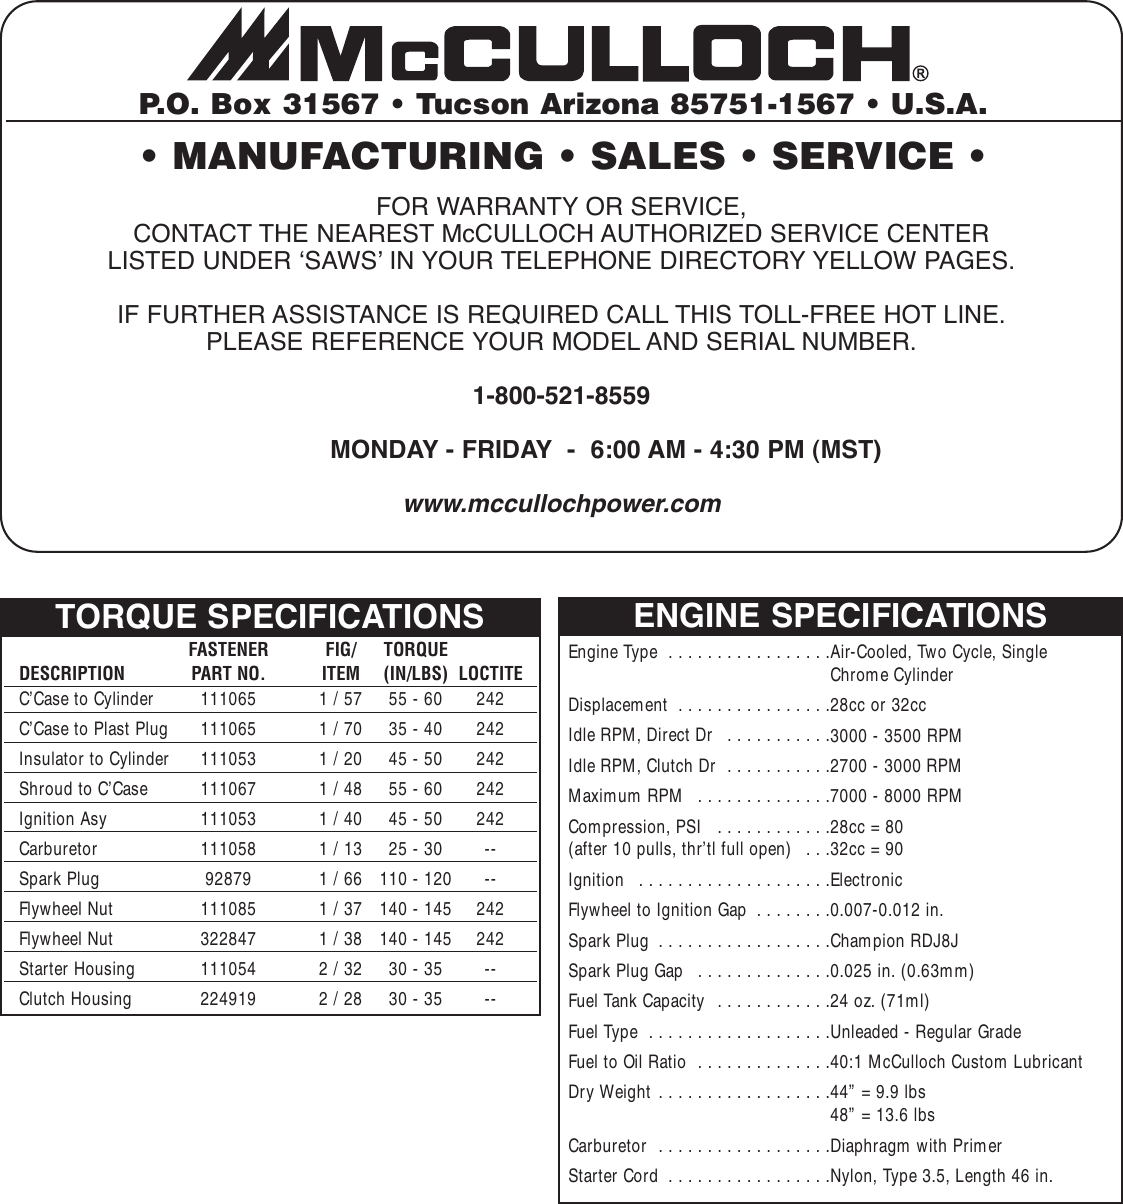 Page 8 of 8 - Mcculloch Mcculloch-28Cc-Illustrated-Parts-Breakdown- ManualsLib - Makes It Easy To Find Manuals Online!  Mcculloch-28cc-illustrated-parts-breakdown